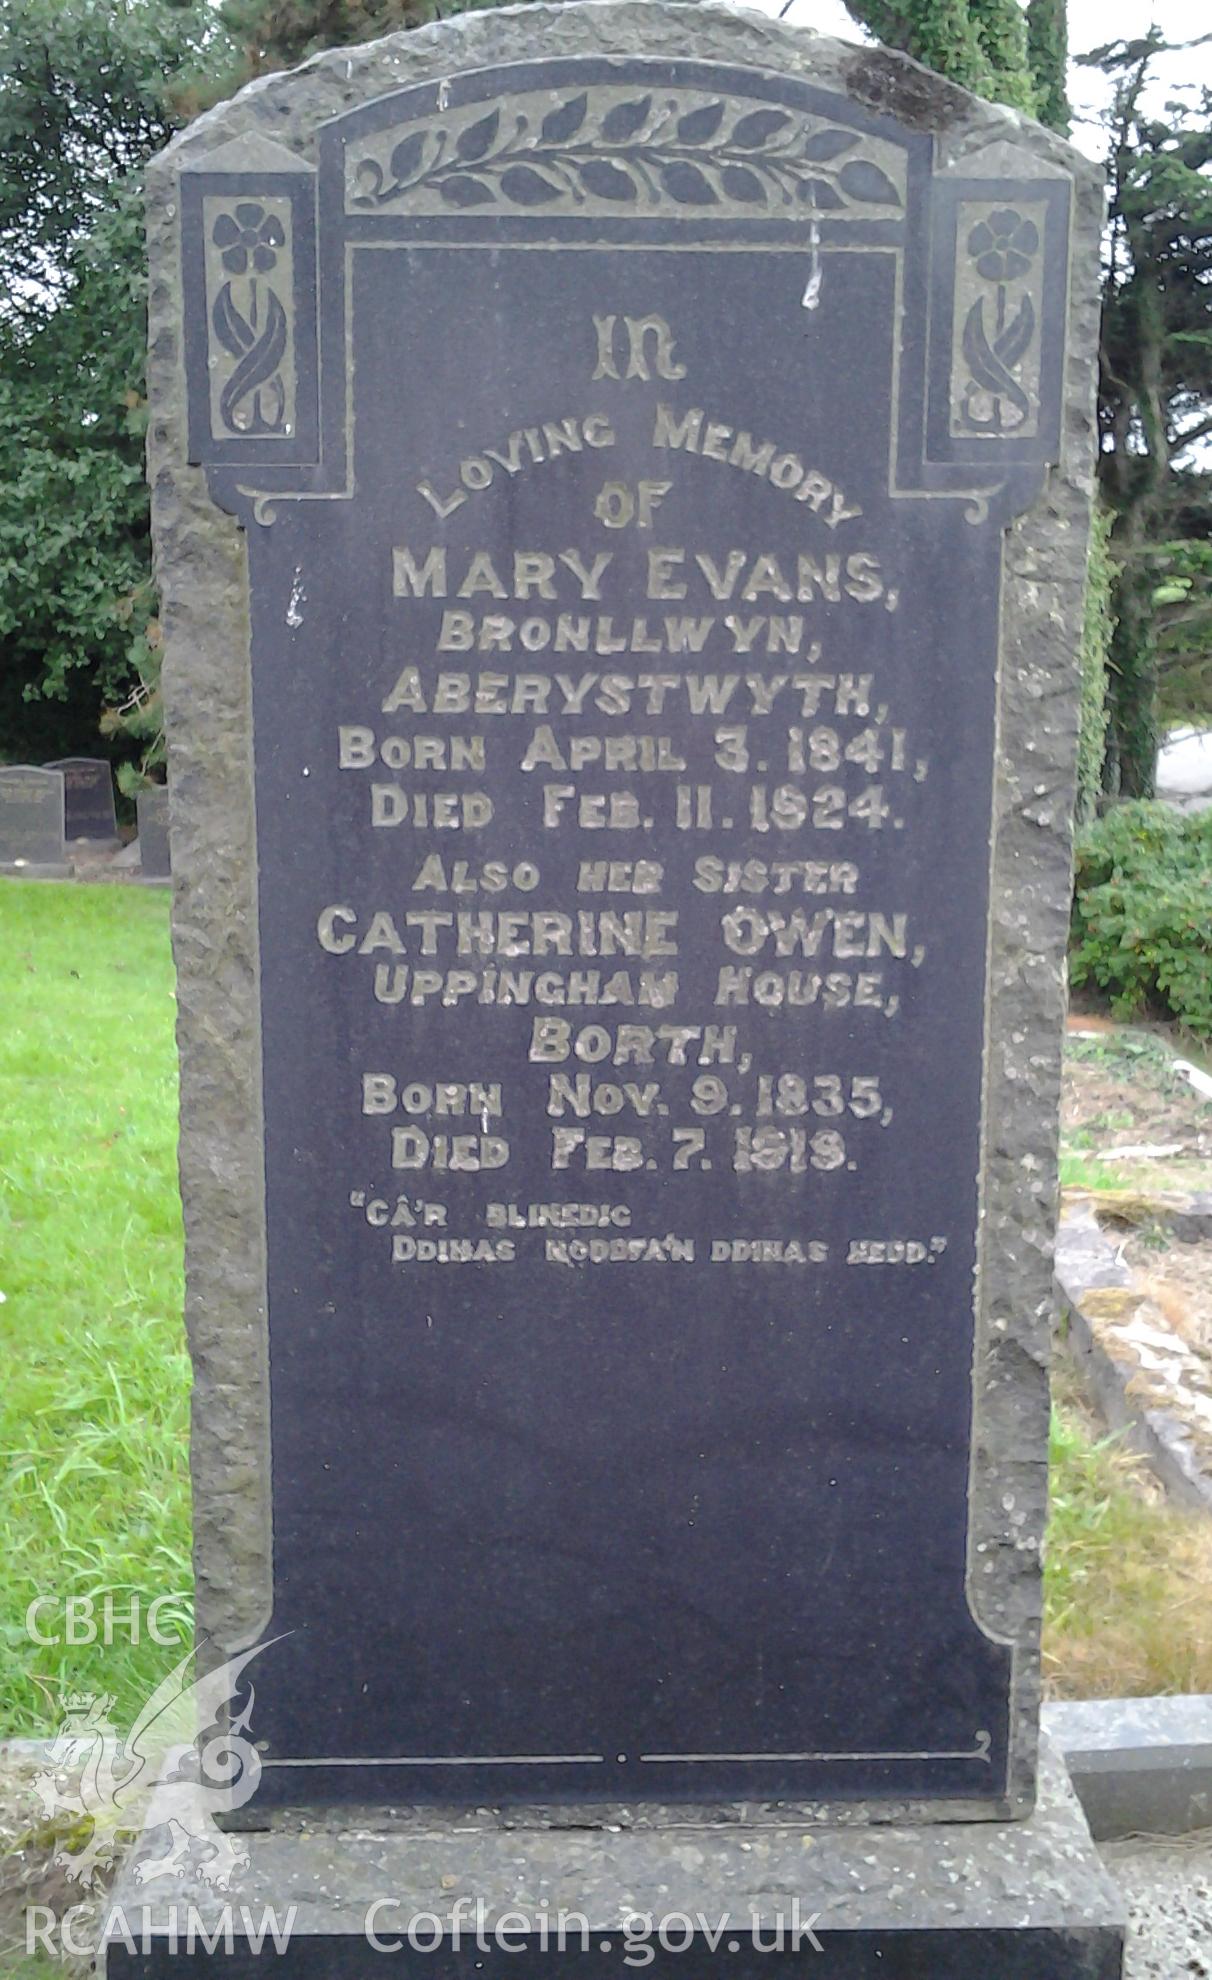 Memorial to Mary Evans (died Feb 11 1824) and her sister Catherine Owen (died Feb 7 1919) of Uppingham House, Borth